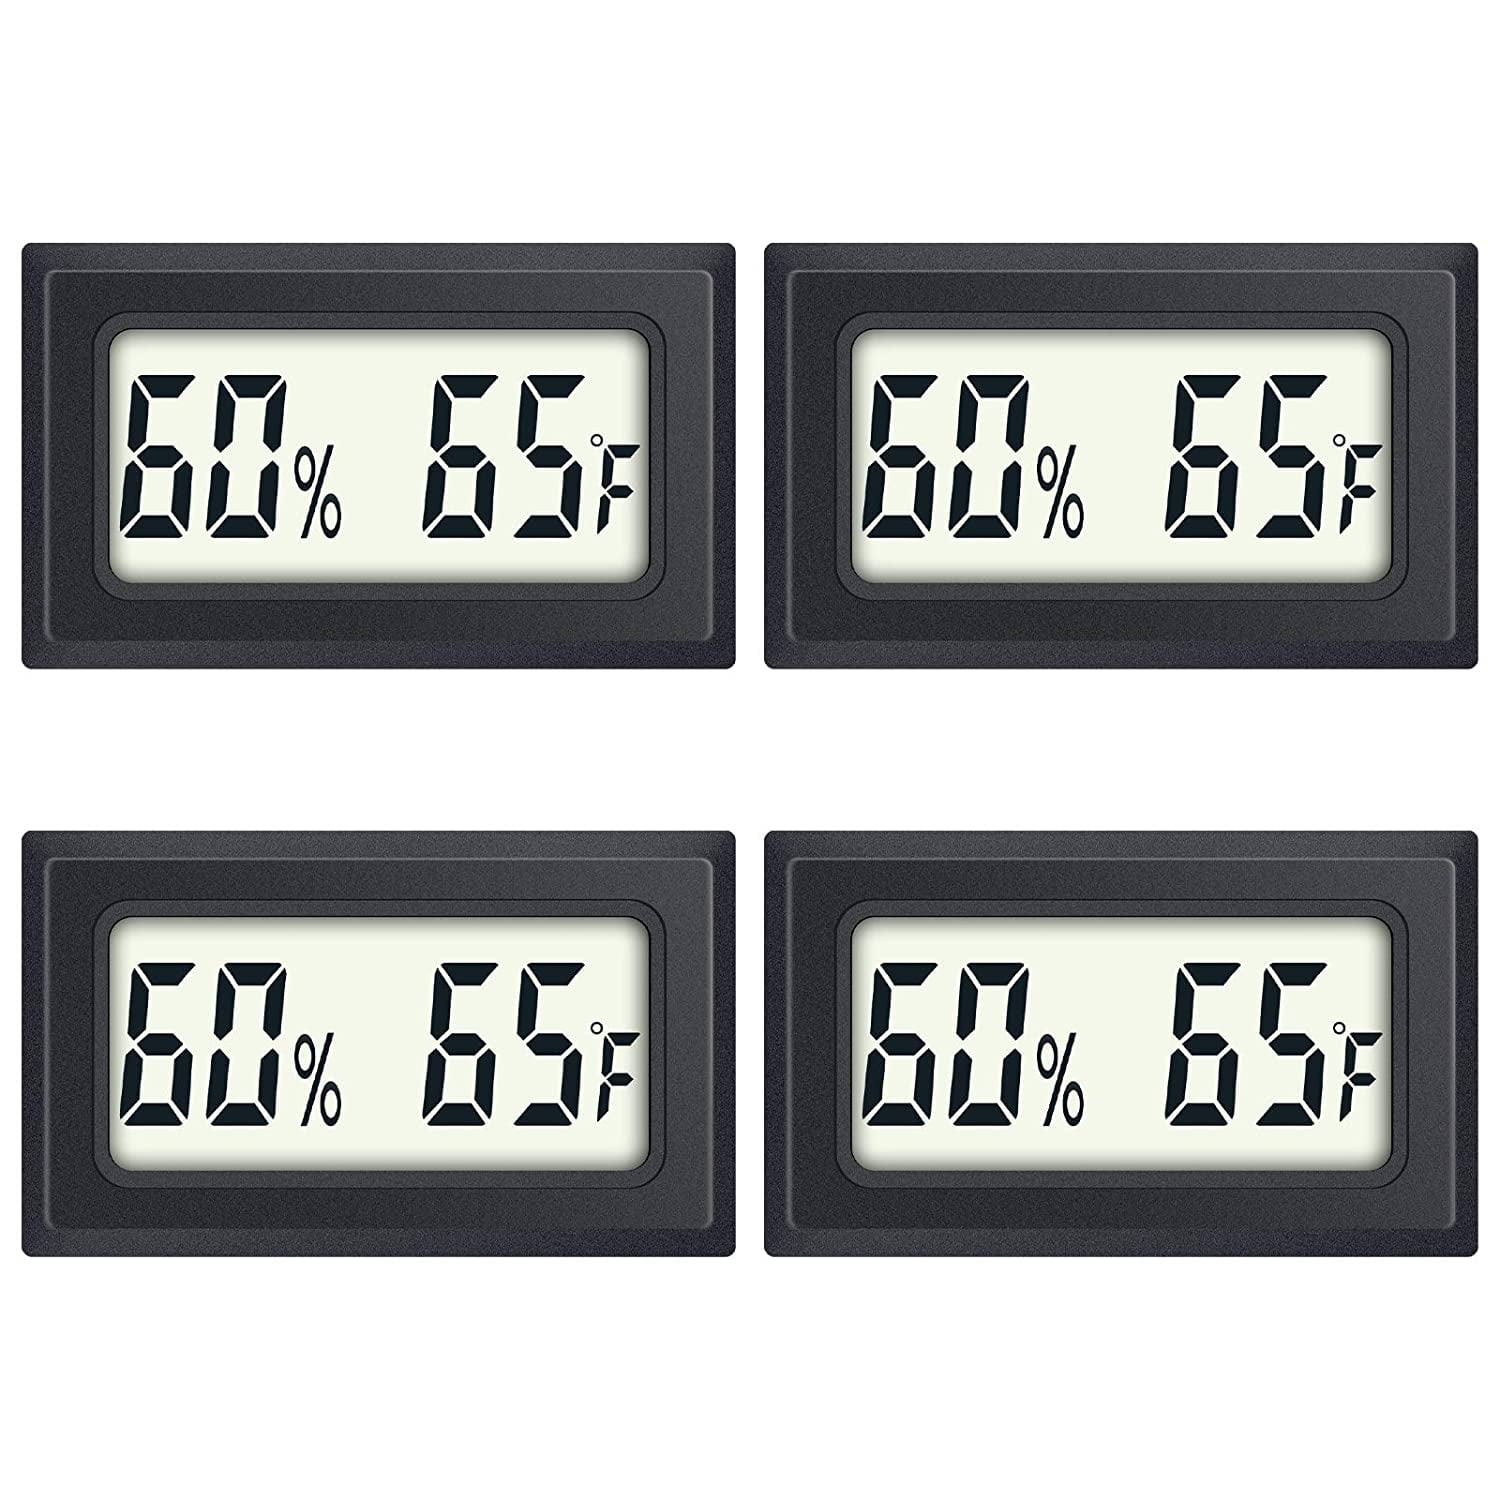 Digital Thermometer Indoor Hygrometer Room Thermometers and Humidity Gauge  with Temperature Humidity Monitor by AikTryee